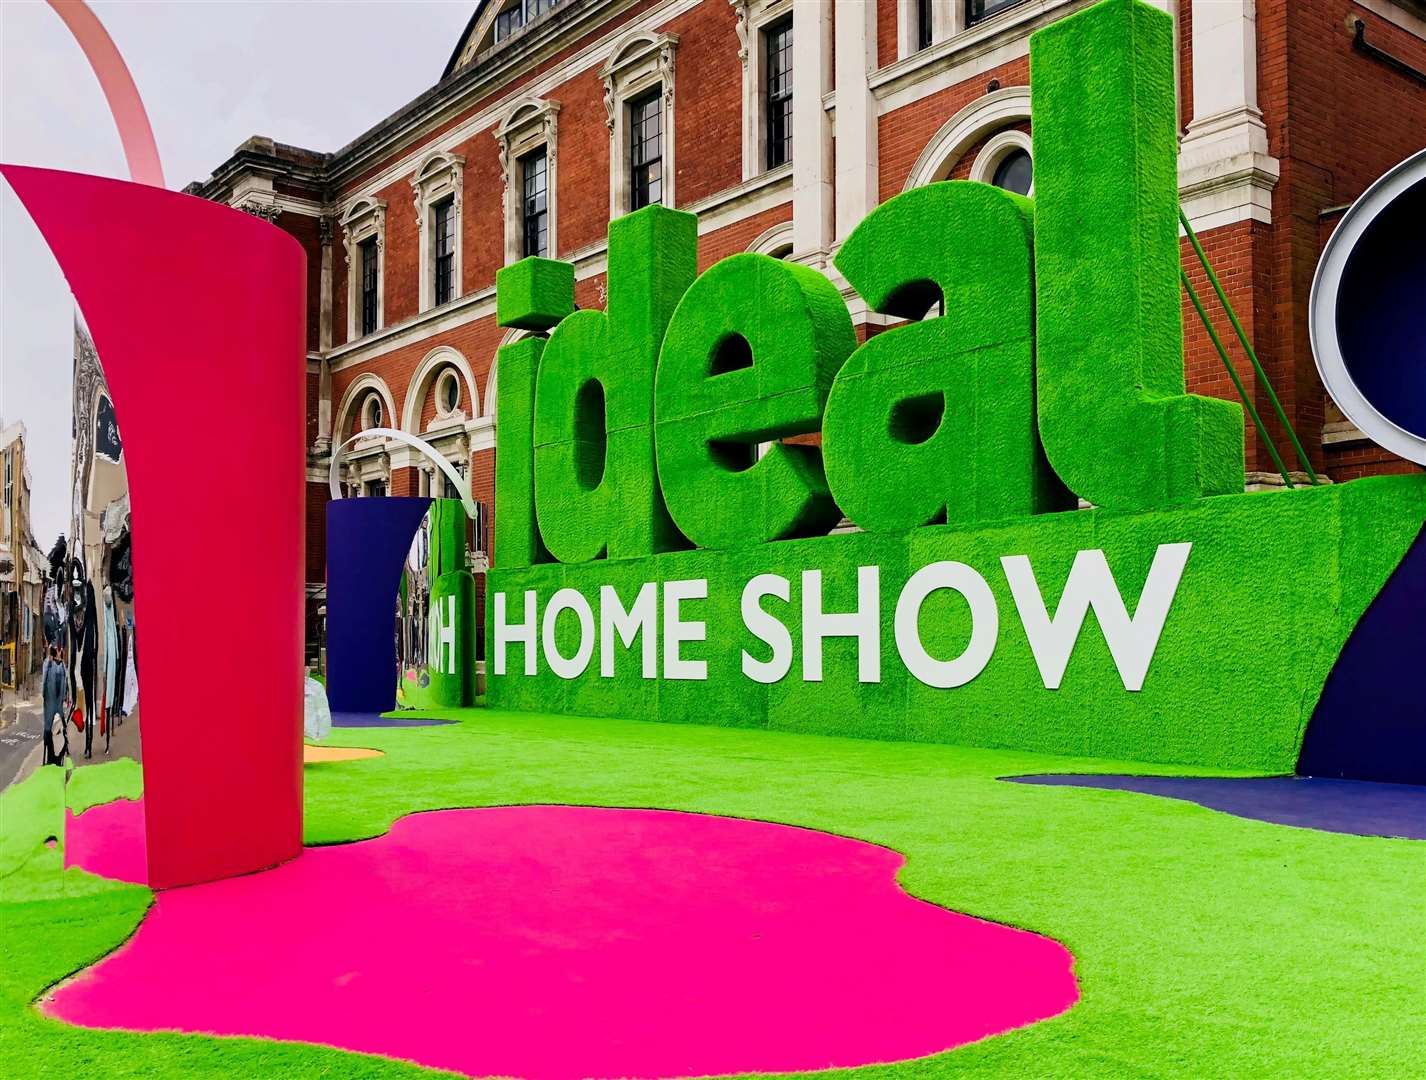 Ideal Home Show at Christmas Free Tickets - wide 1